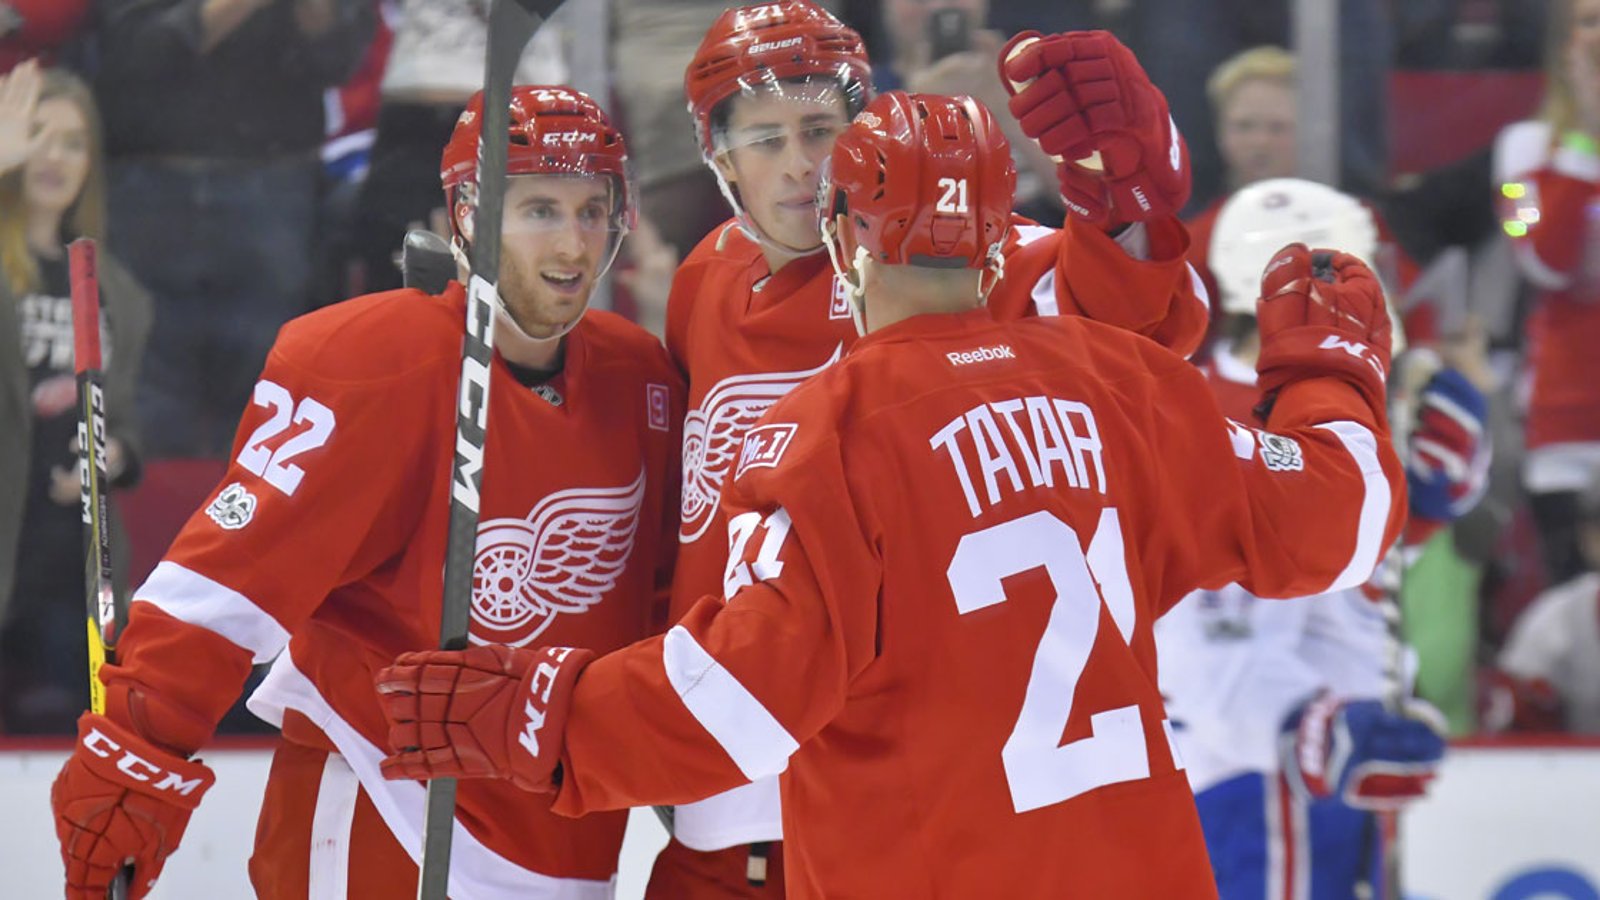 Breaking: New details emerged concerning Tomas Tatar's deal!